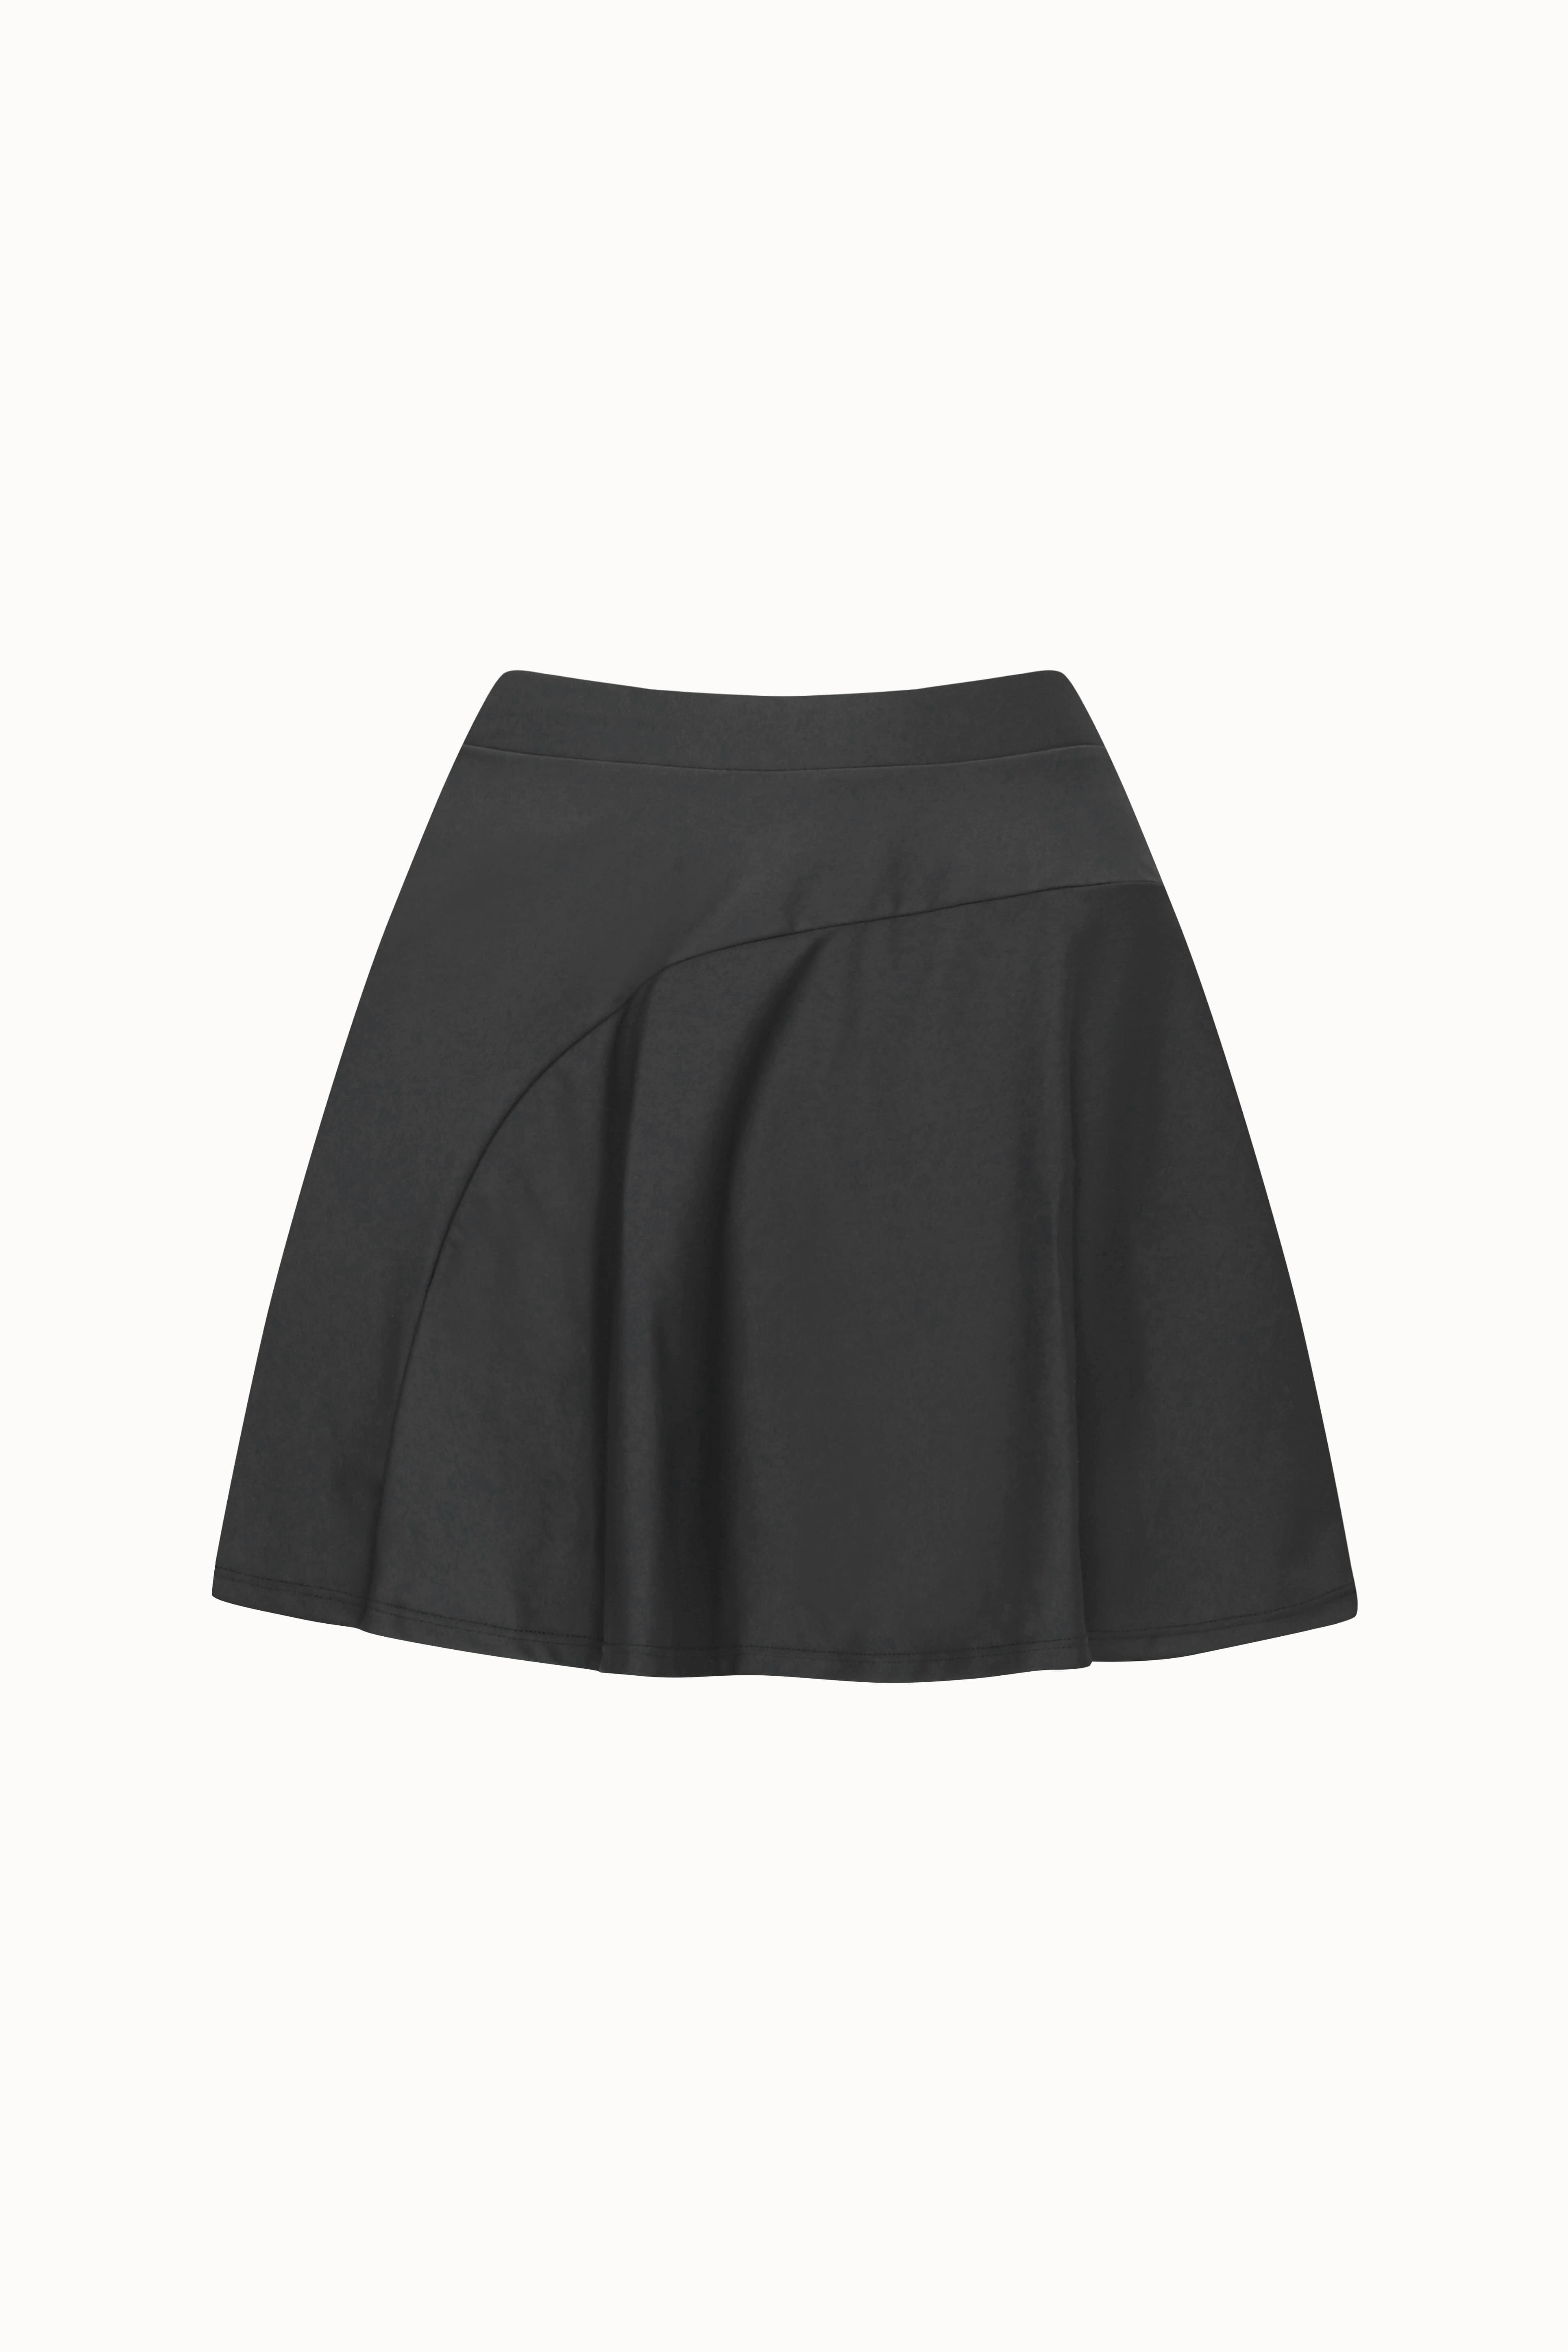 Cutting Line Flare Skirt[LMBDSW233]-Charcoal